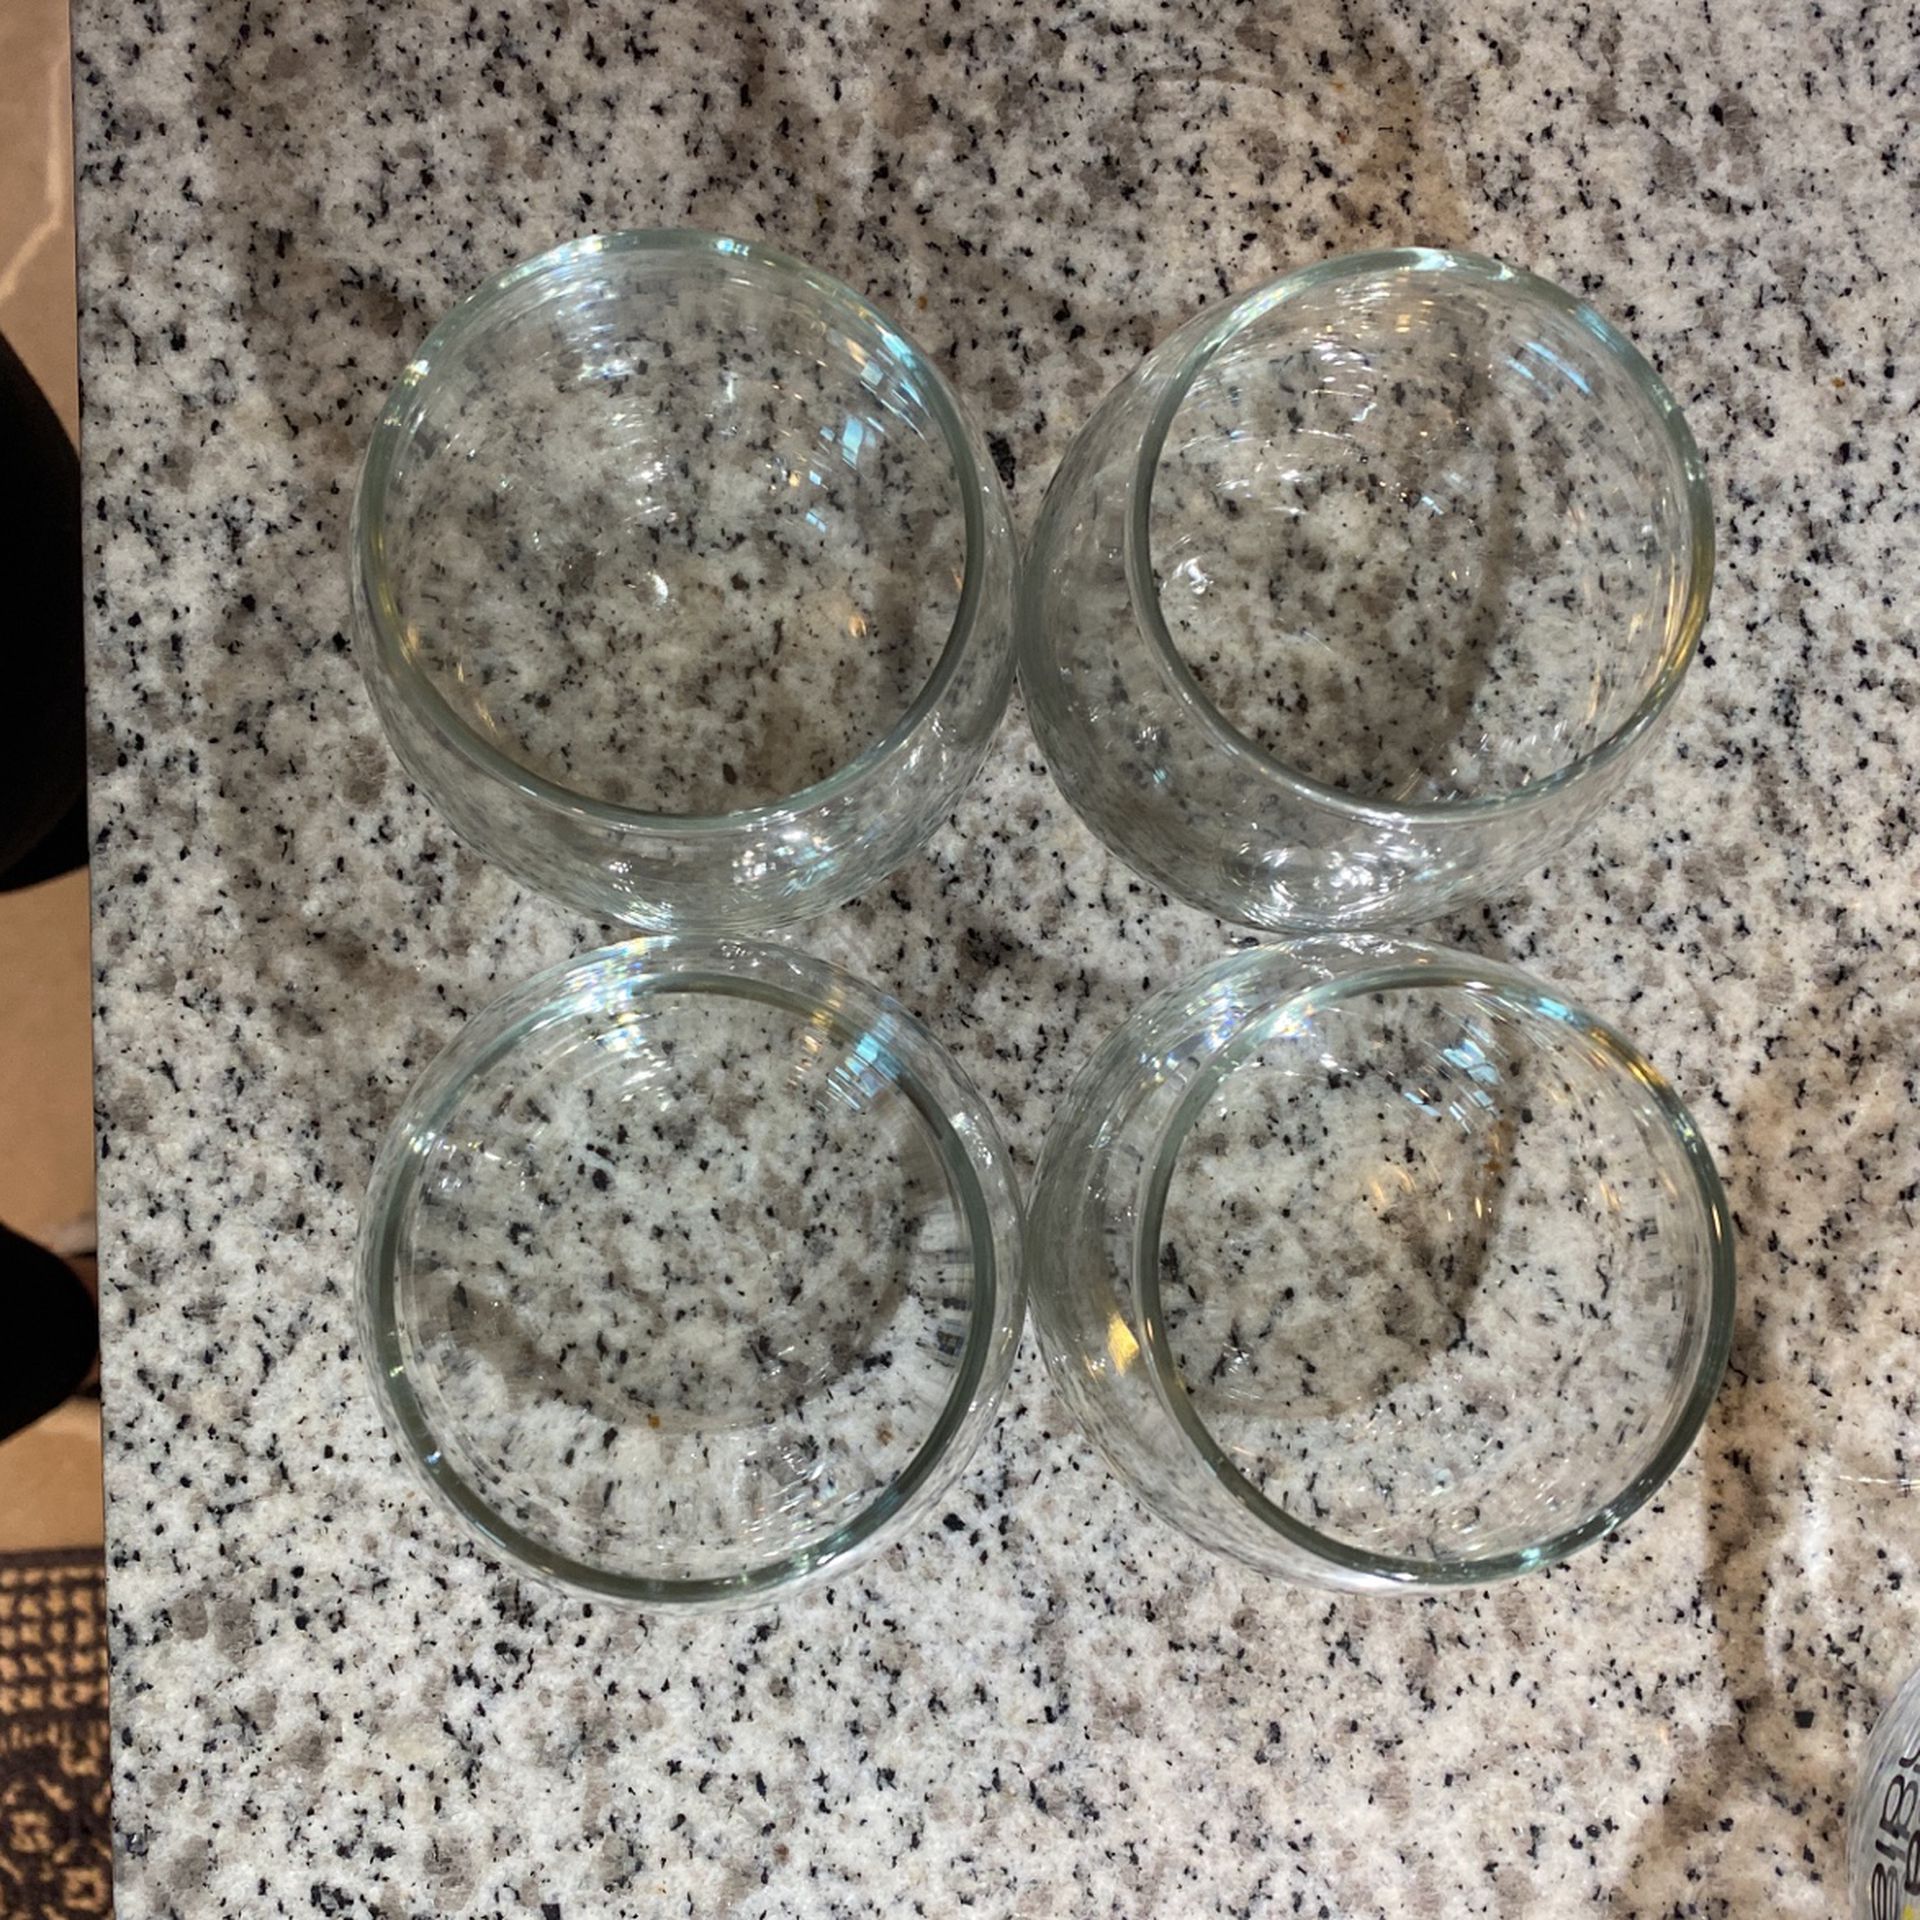 Customized No Stem Wine Glasses for Sale in Tacoma, WA - OfferUp